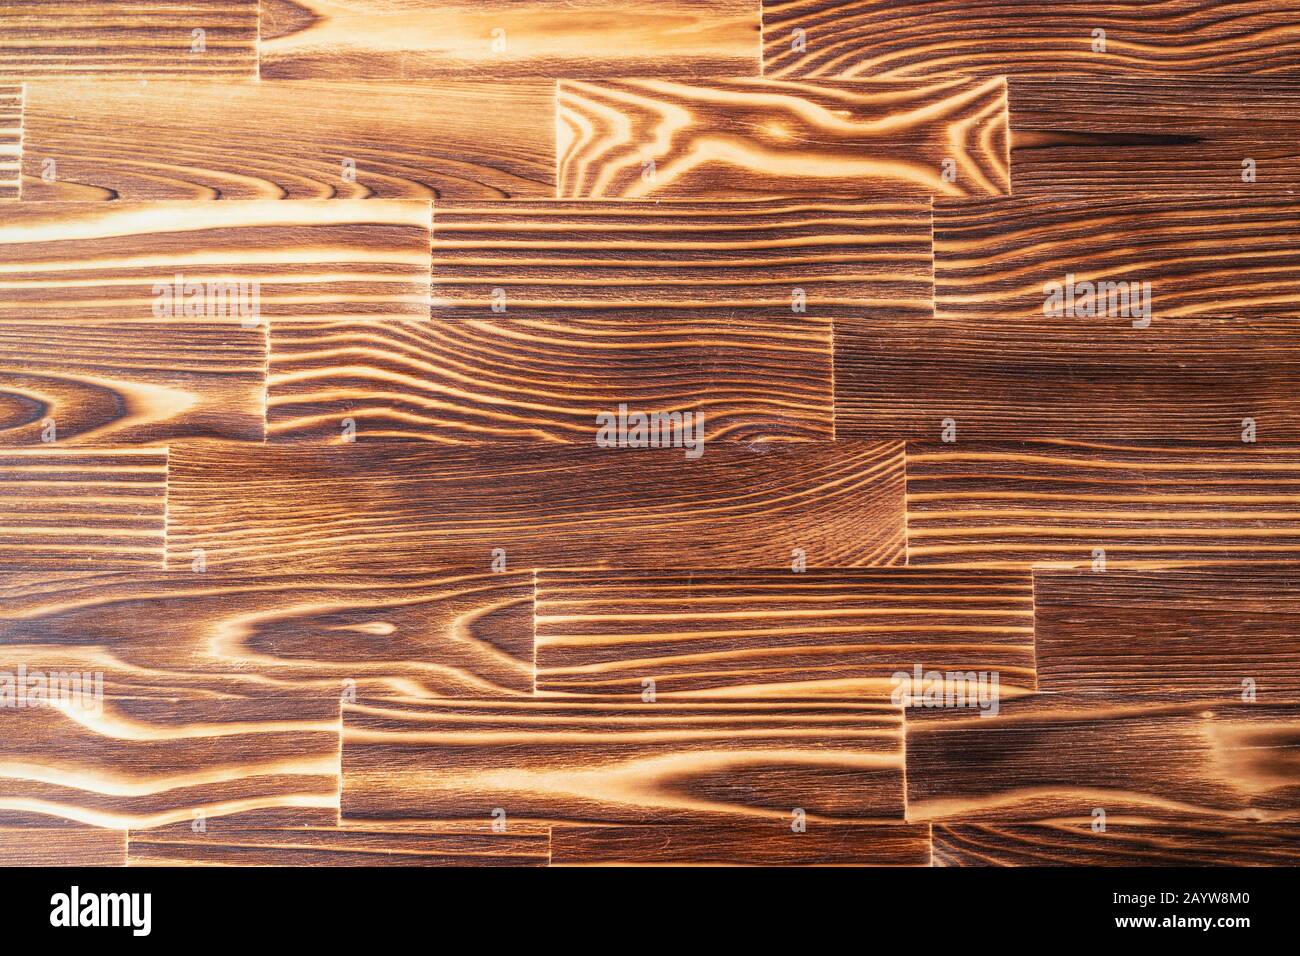 Brown burned and unpainted natural wood with grains for background and texture Stock Photo